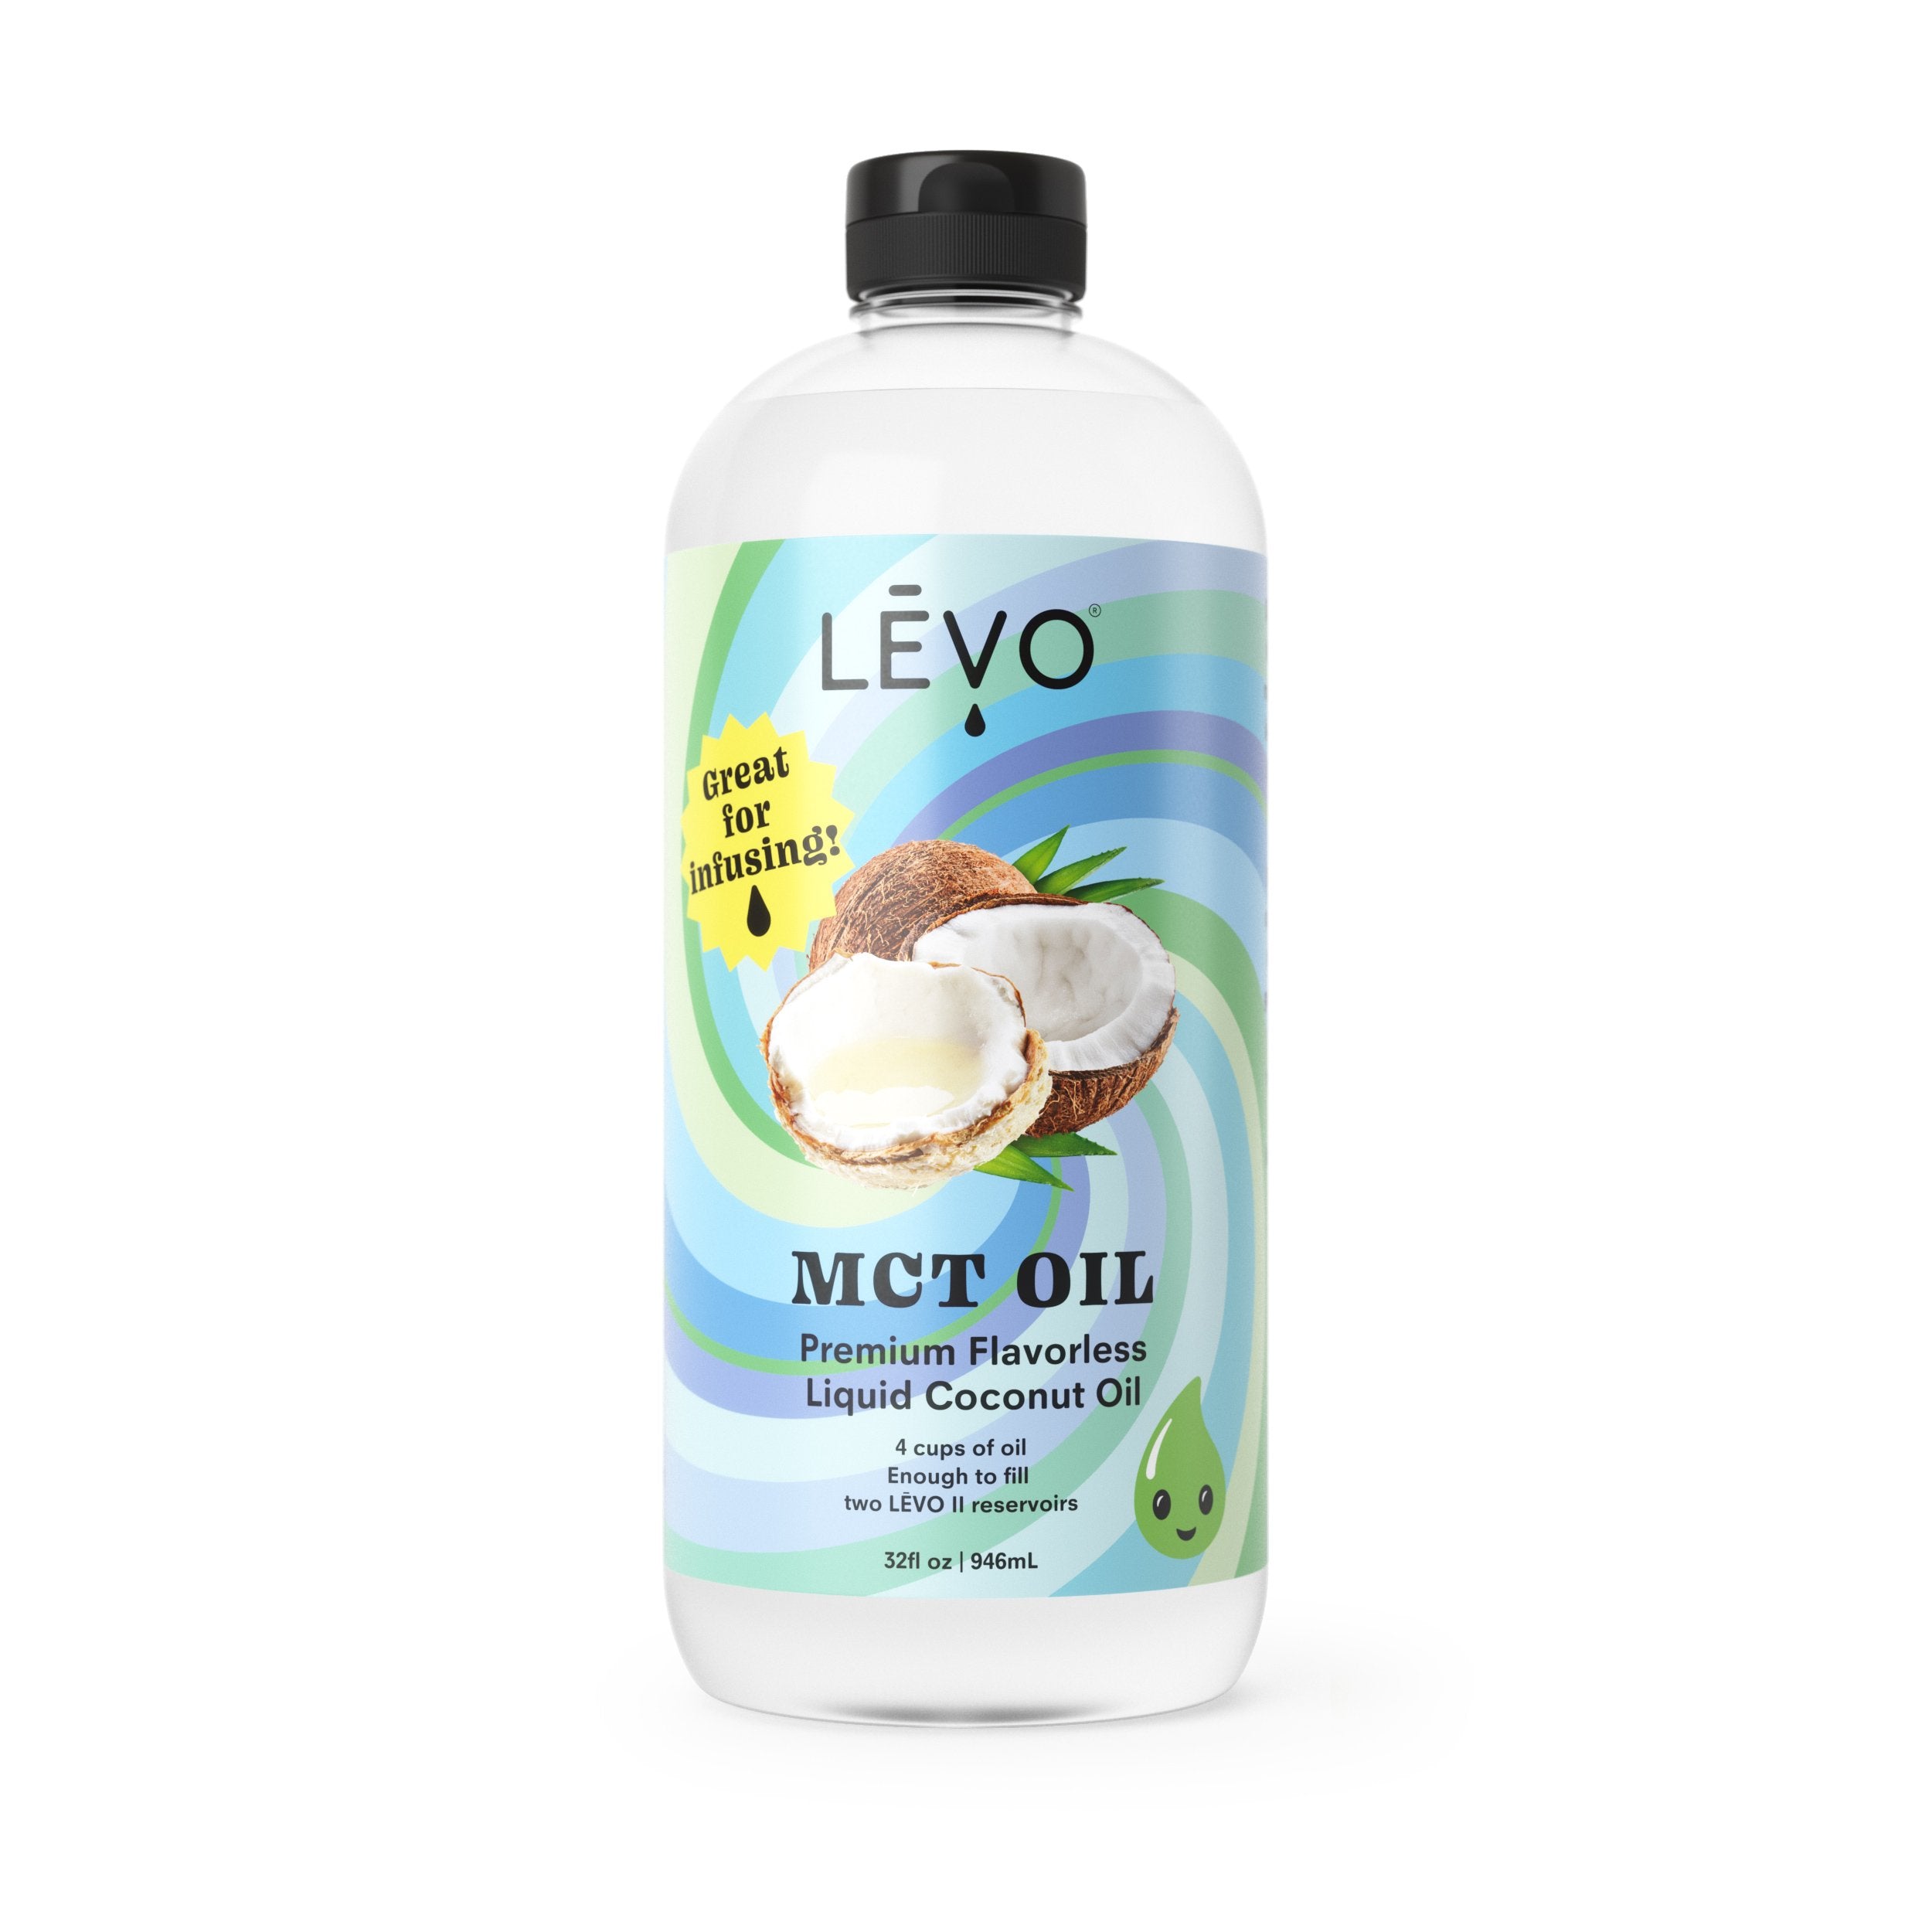 LEVO MCT Oil is a premium, flavorless liquid coconut oil. At 32 fl oz, it will fill 2 LEVO II reservoirs to capacity, 4 cups total. Great for infusing!